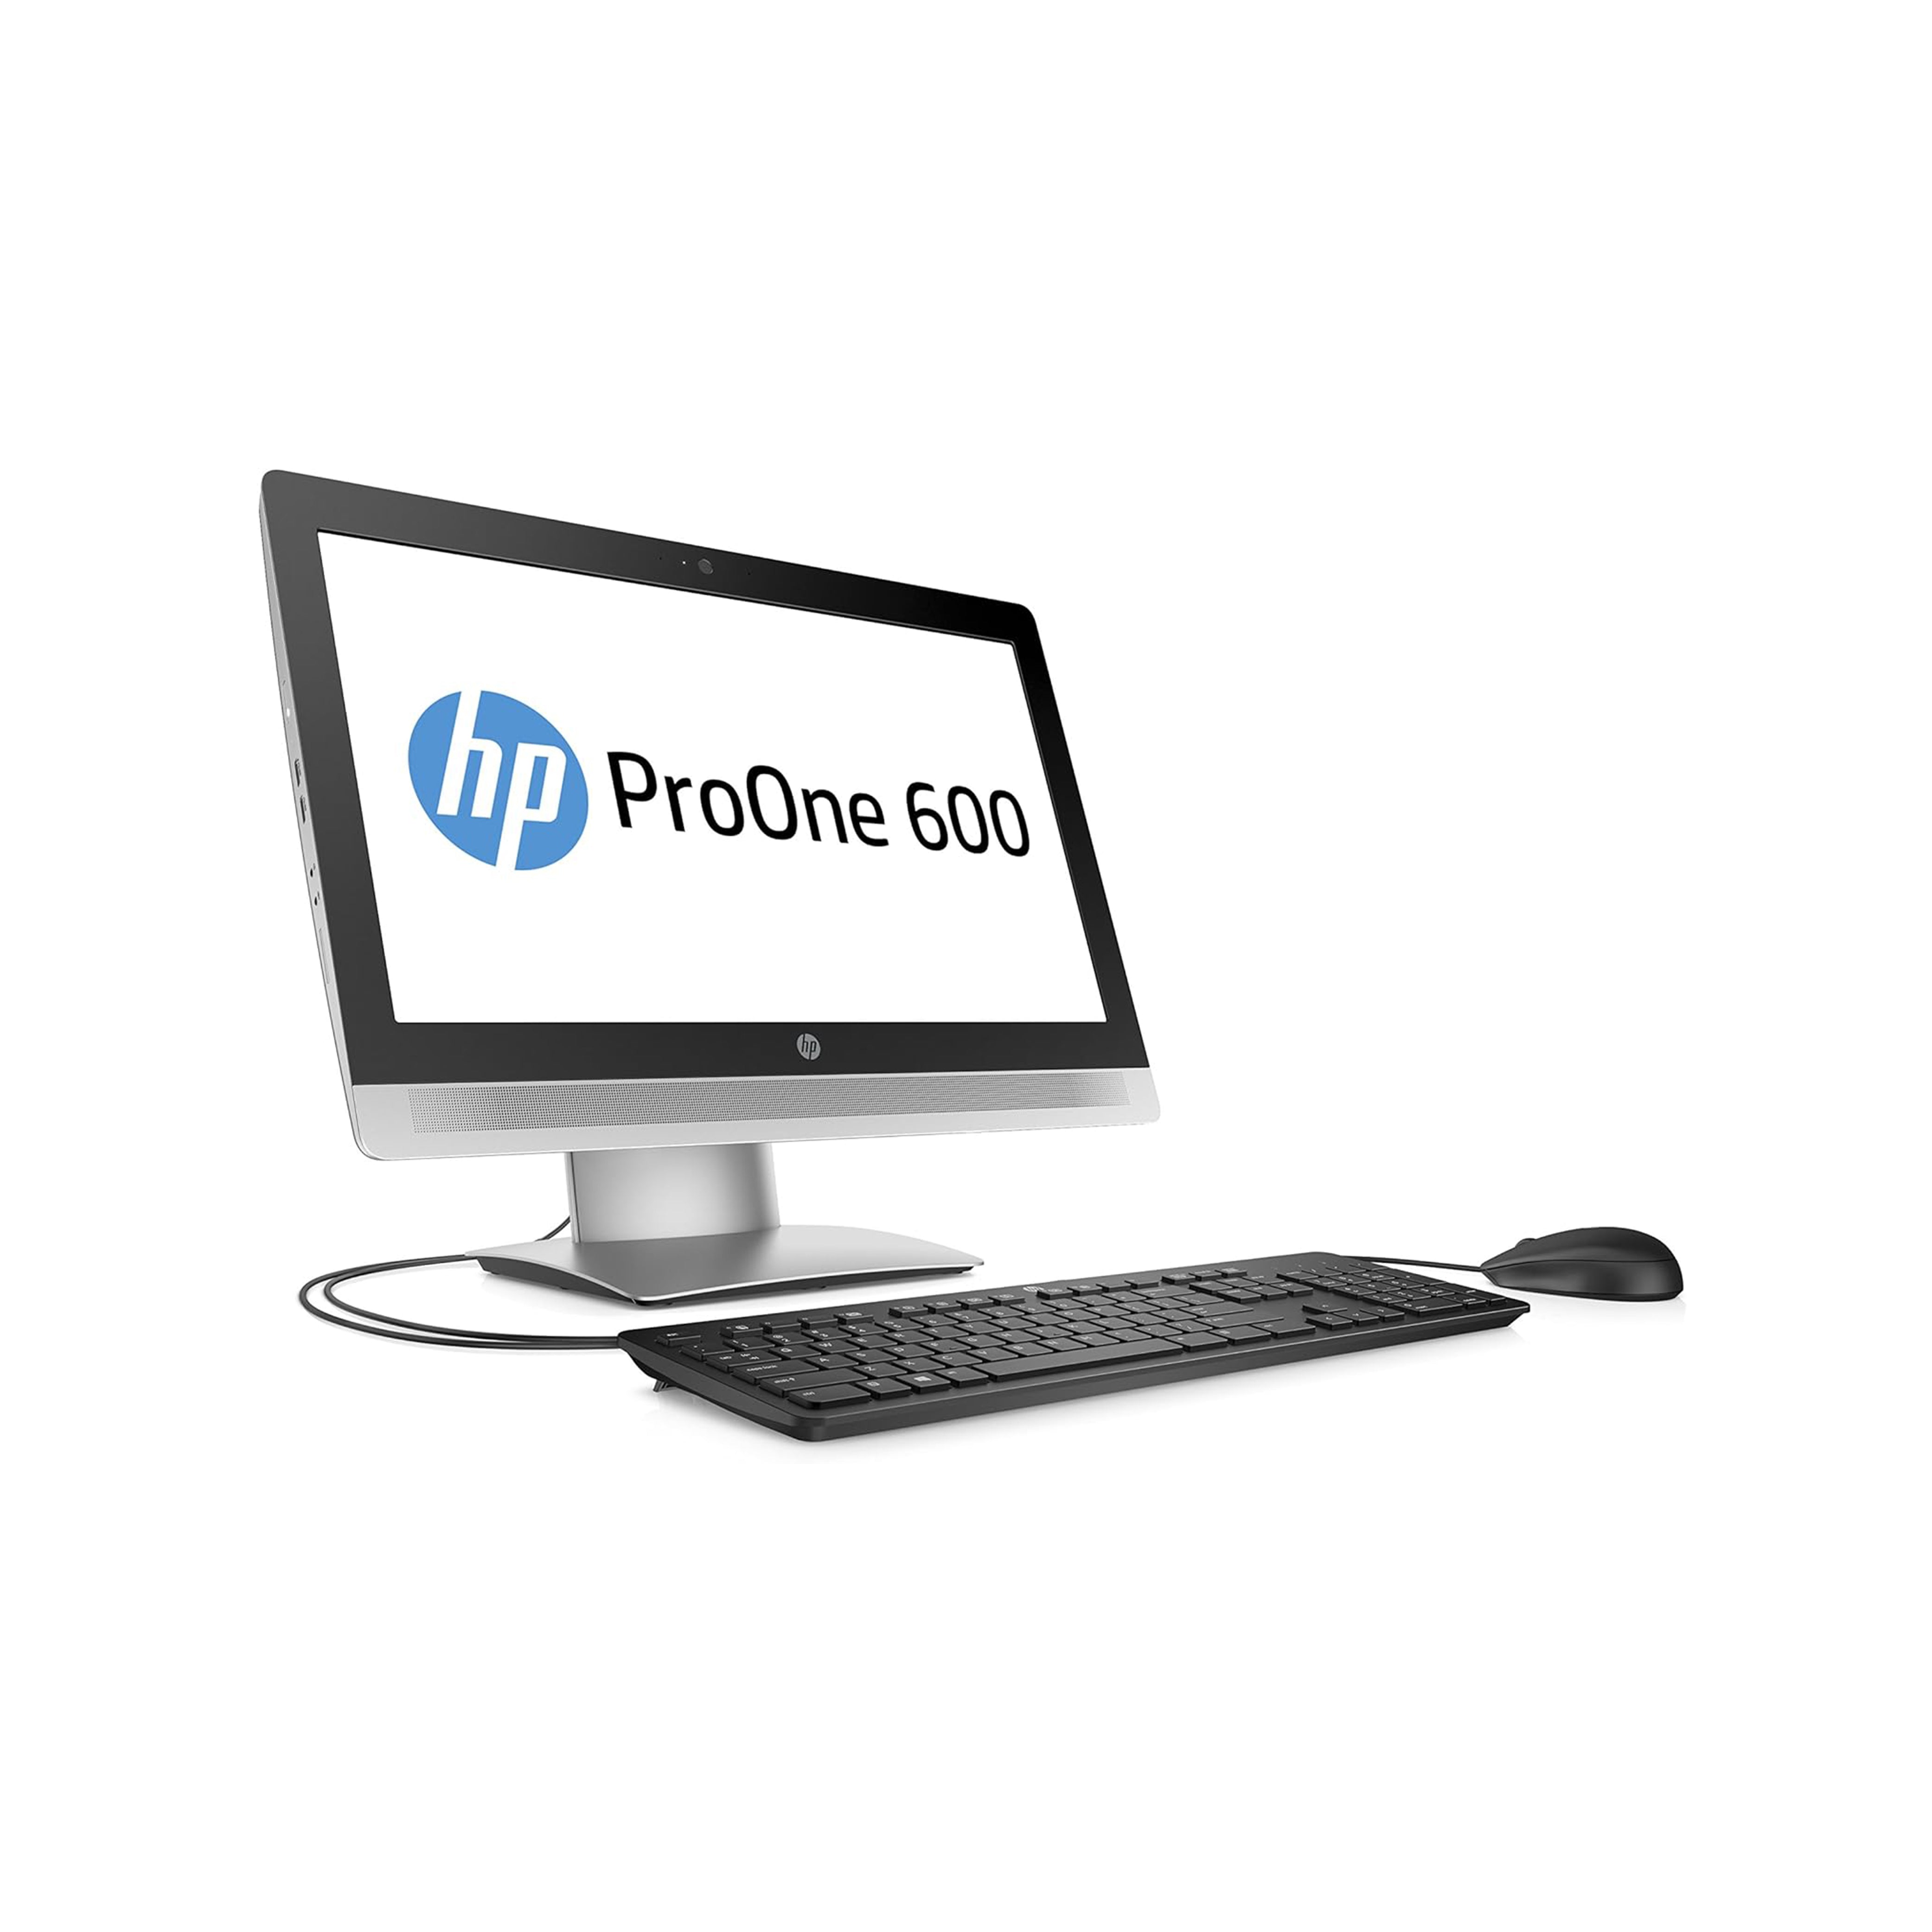 HP ProOne 600 G2 All-in-One - PC/タブレット